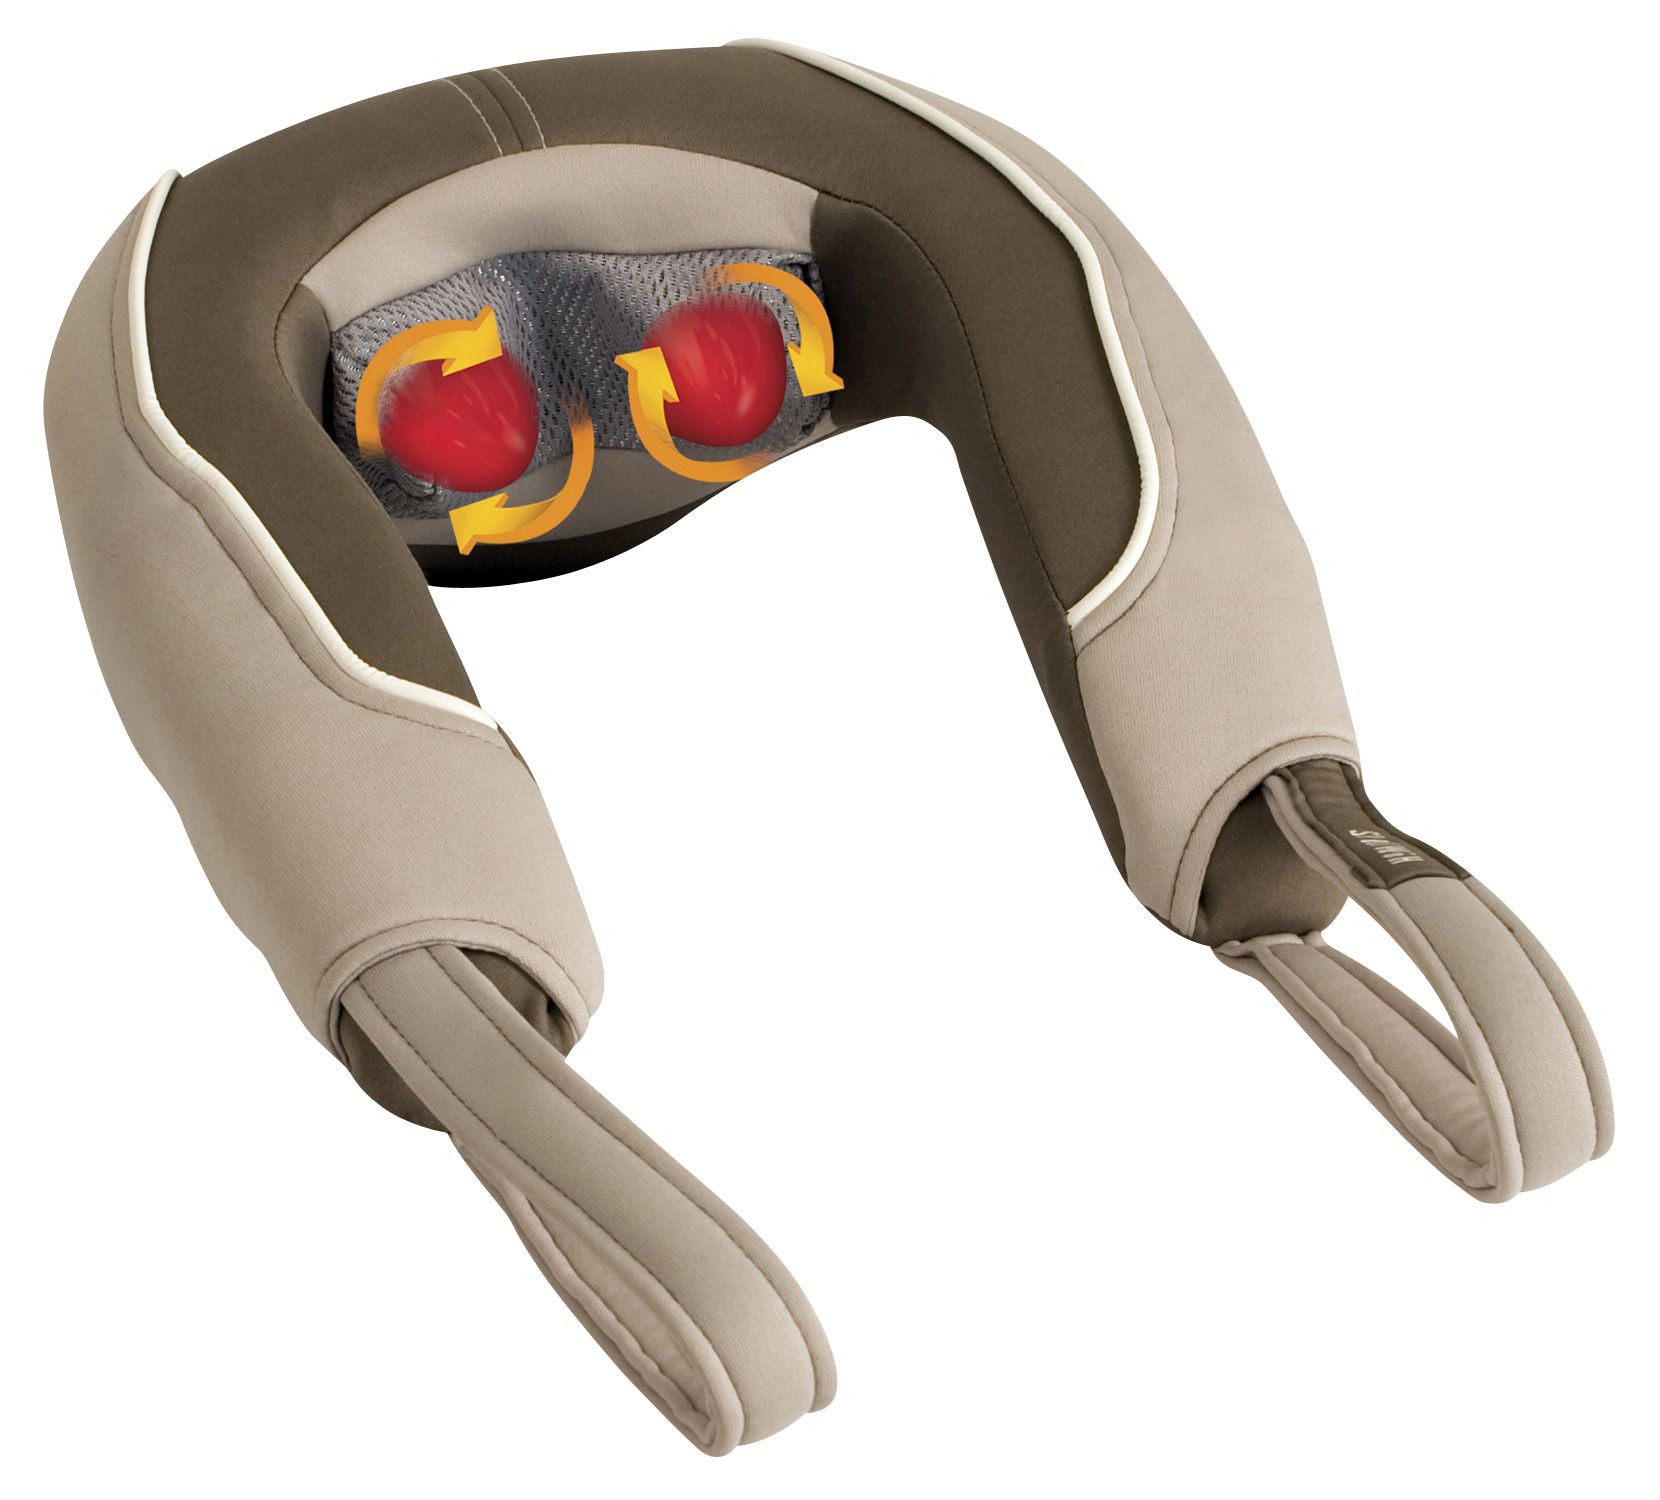 Homedics Vibration Neck Massager with Soothing Heat for sale online